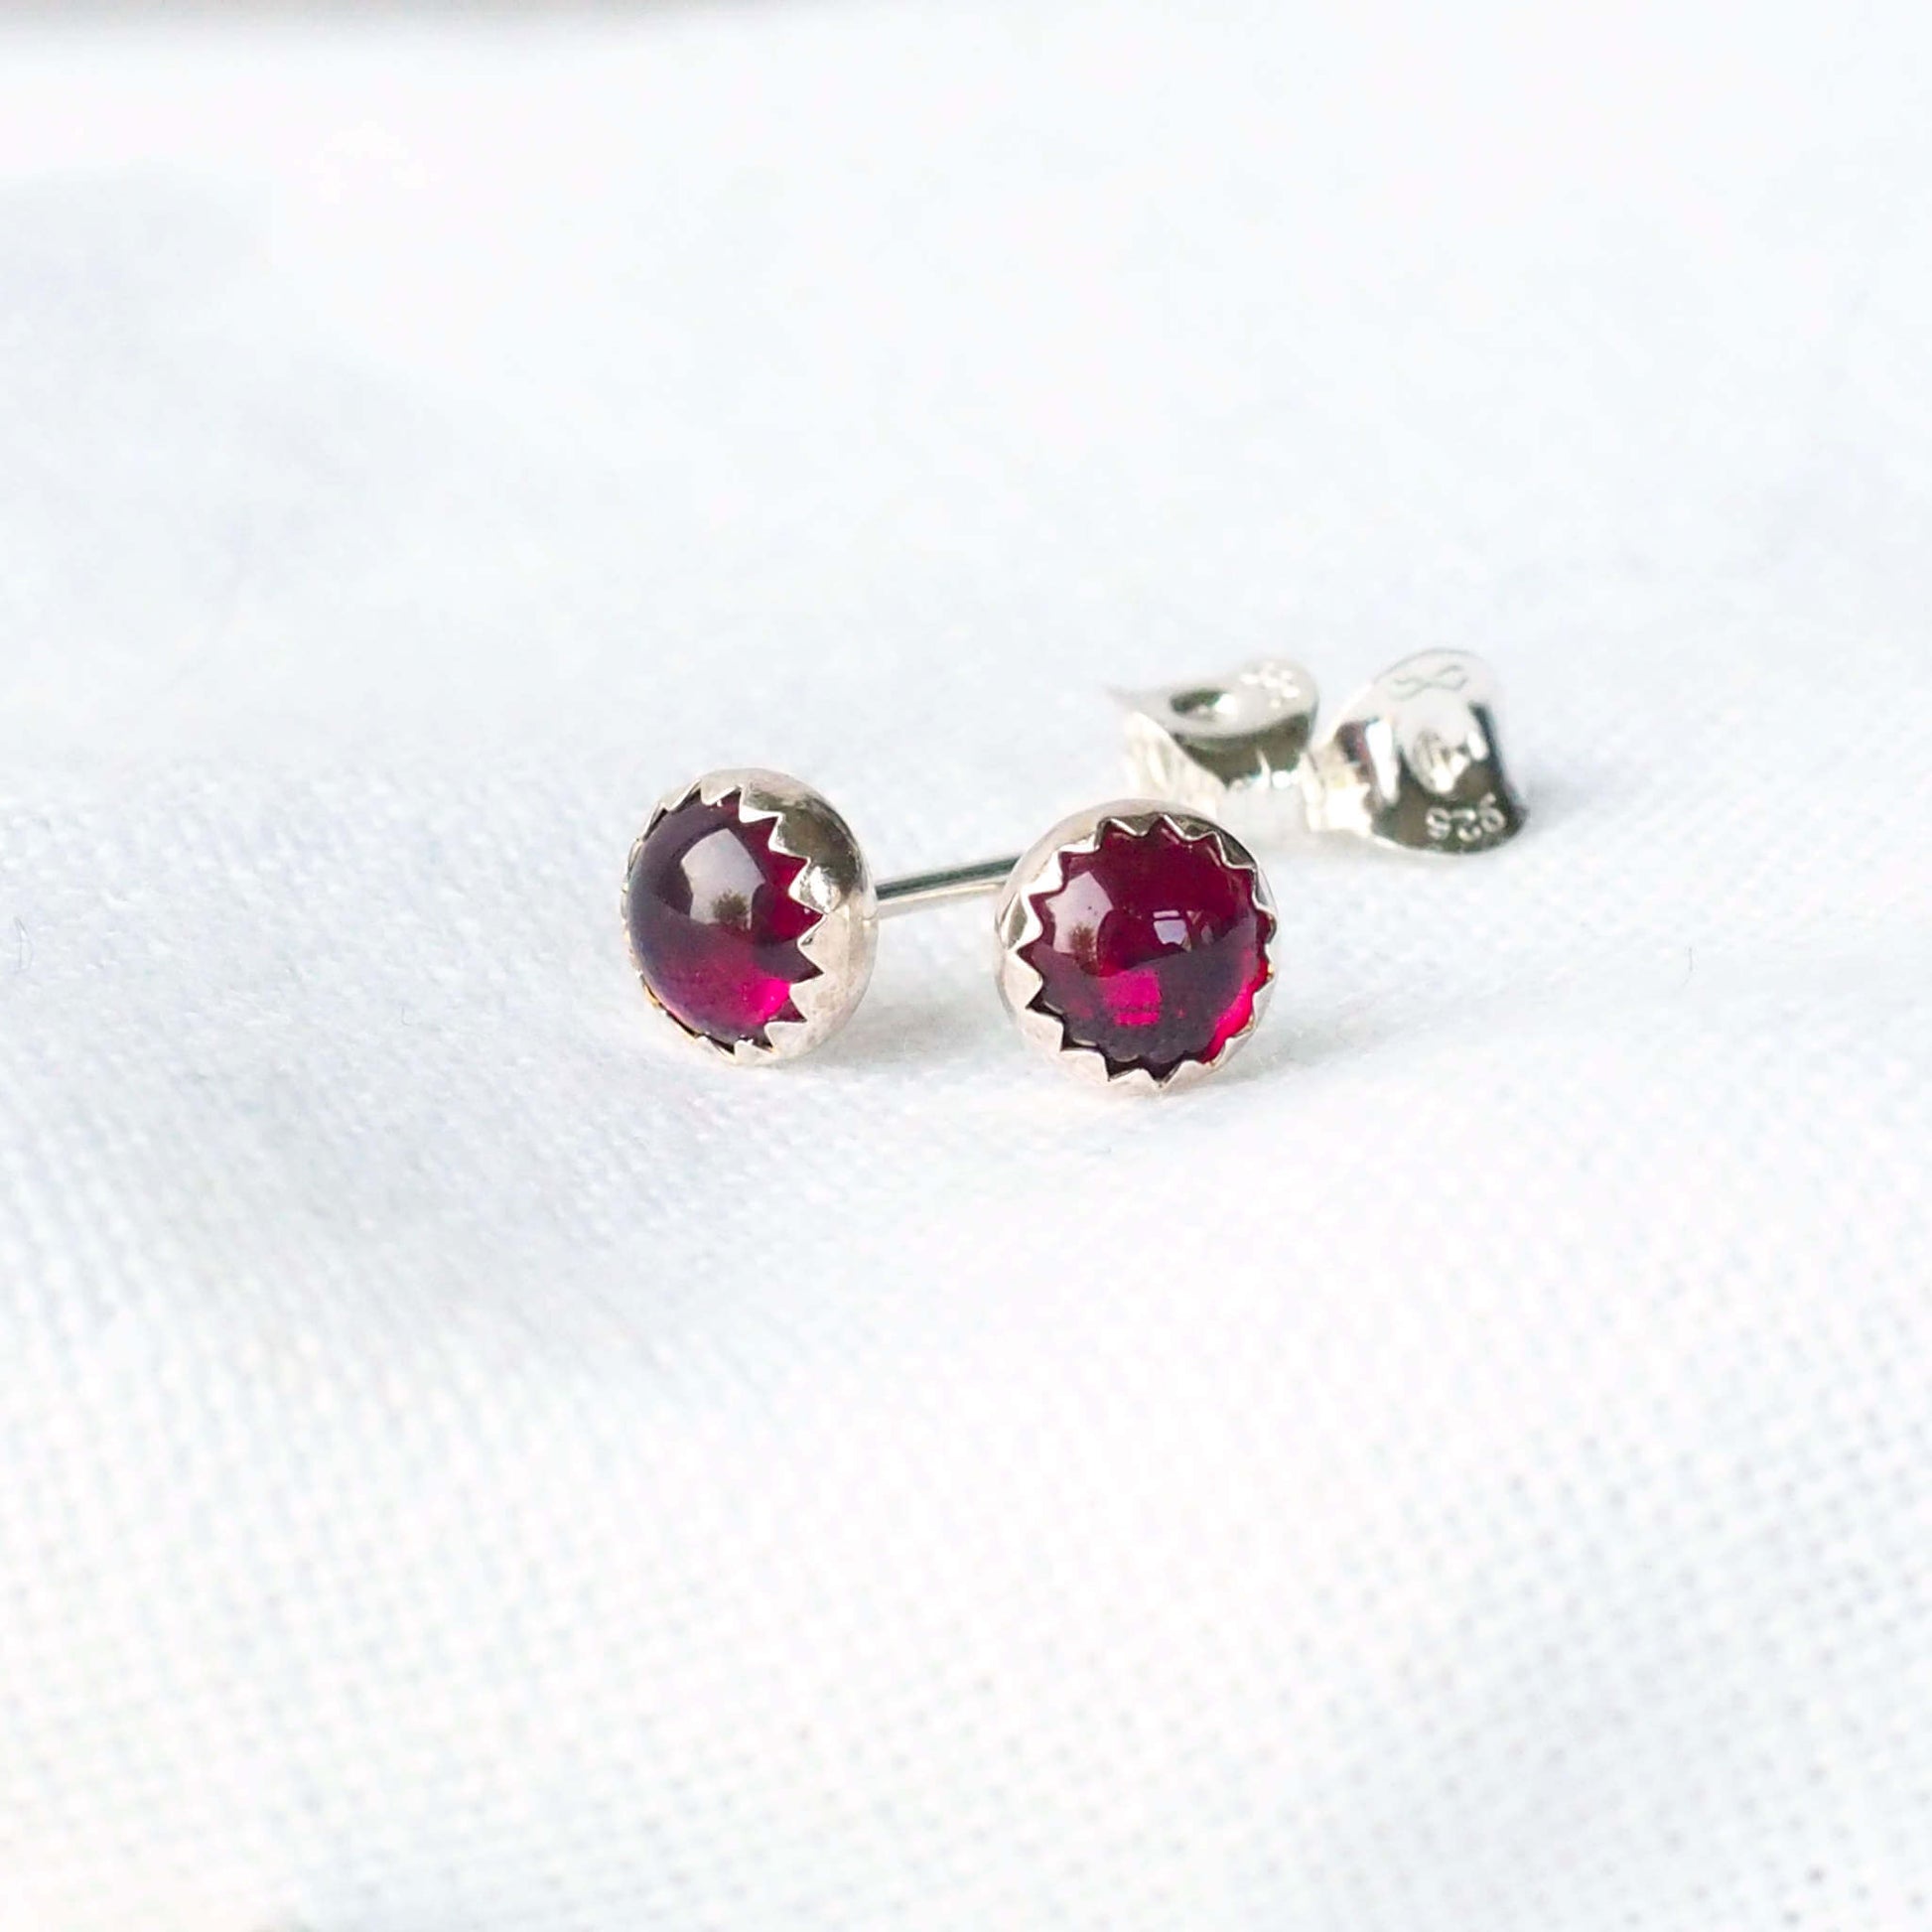 Simple gemstone stud earrings made with a pair of rich red round 5mm cabochon cut garnets set into simple silver mounts. handcrafted by maram jewellery, a small independent jeweller in Scotland UK